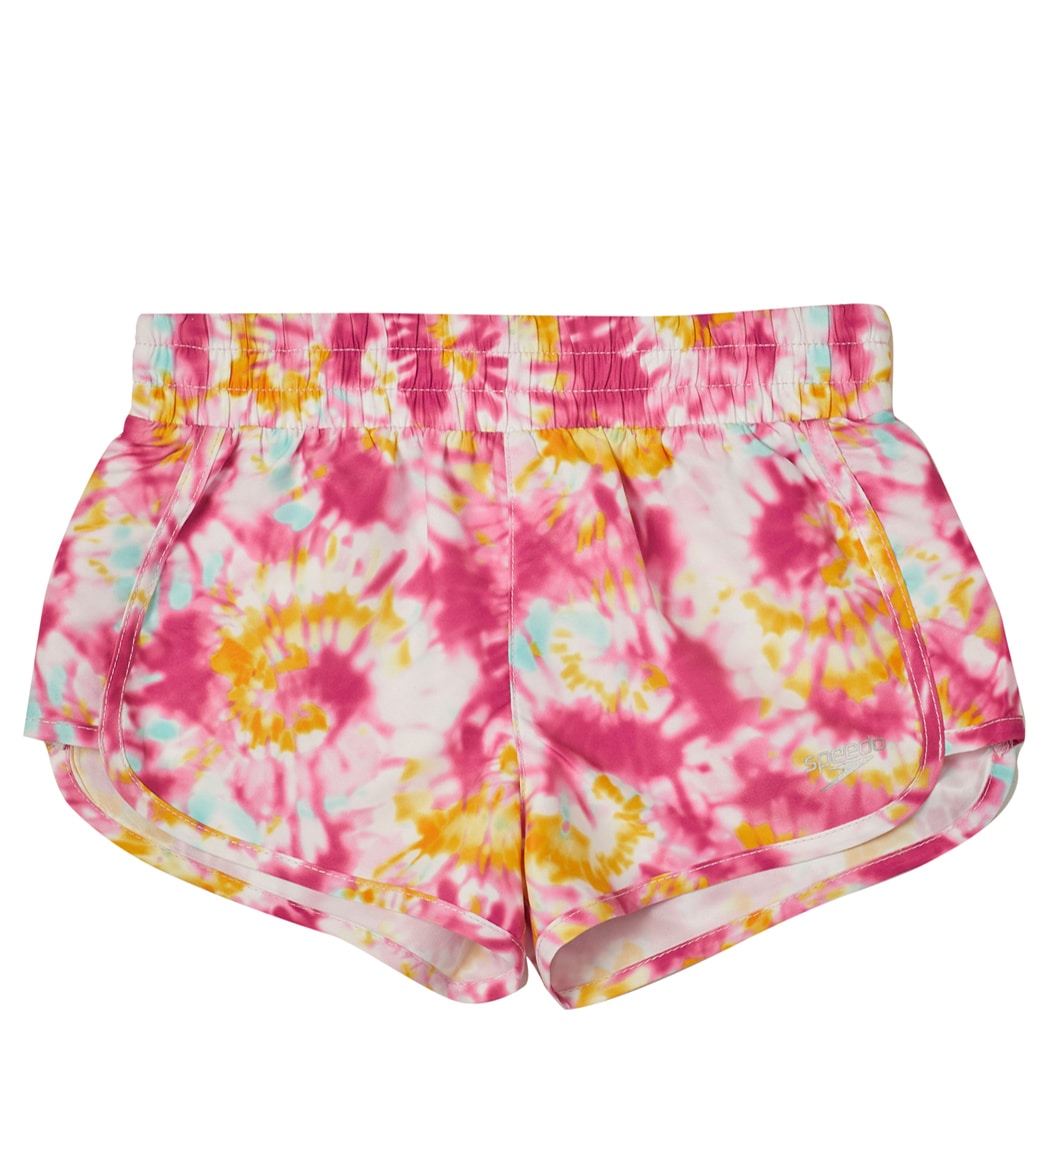 Speedo Girls' Board Shorts - Pink Cosmos Large - Swimoutlet.com